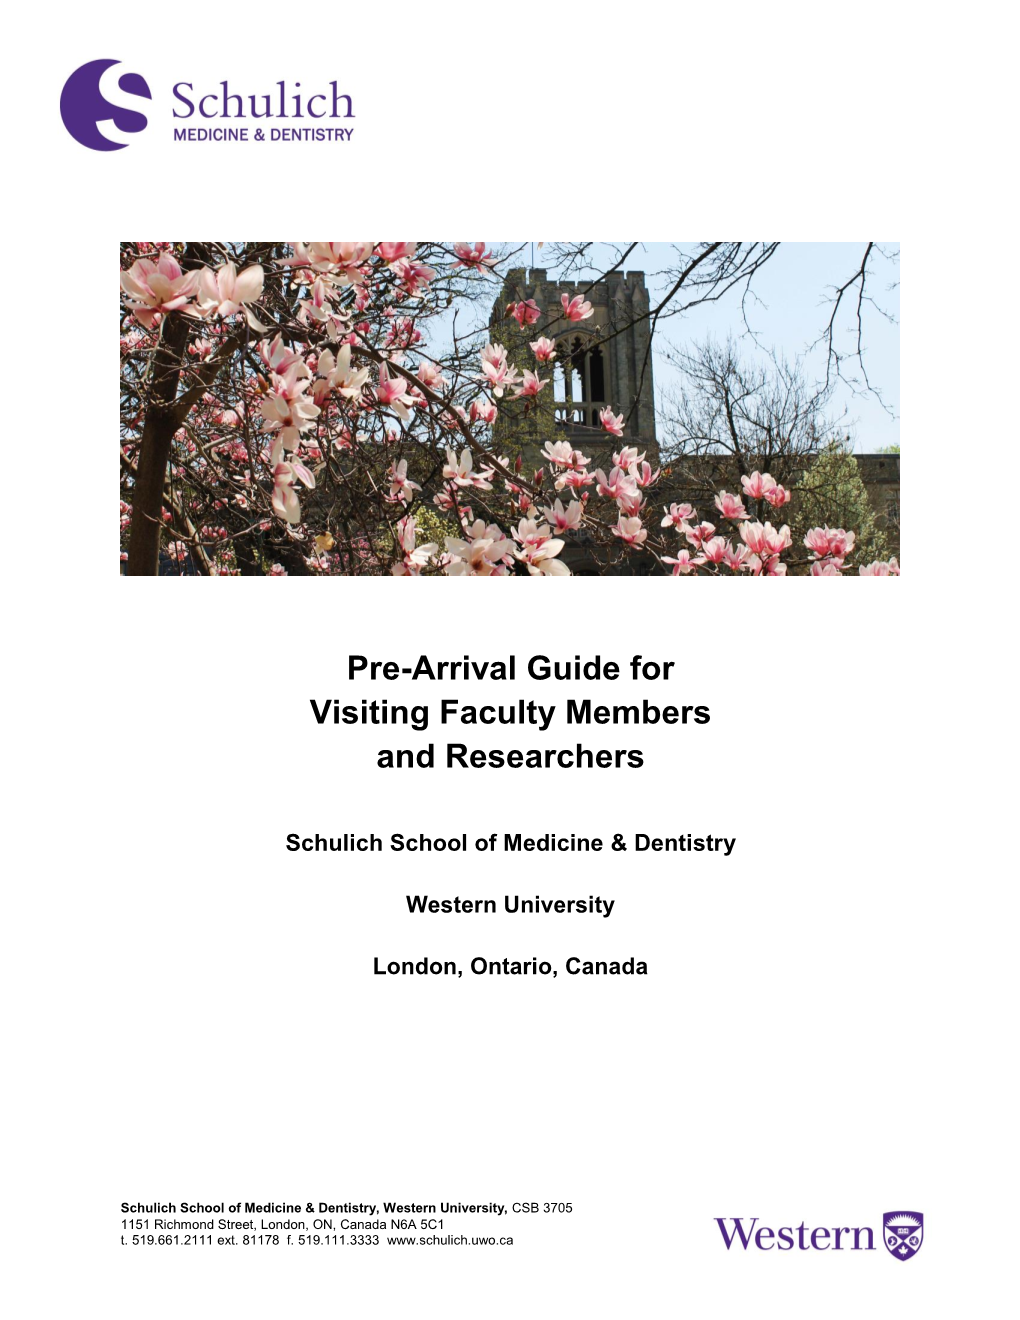 Pre-Arrival Guide for Visiting Faculty Members and Researchers